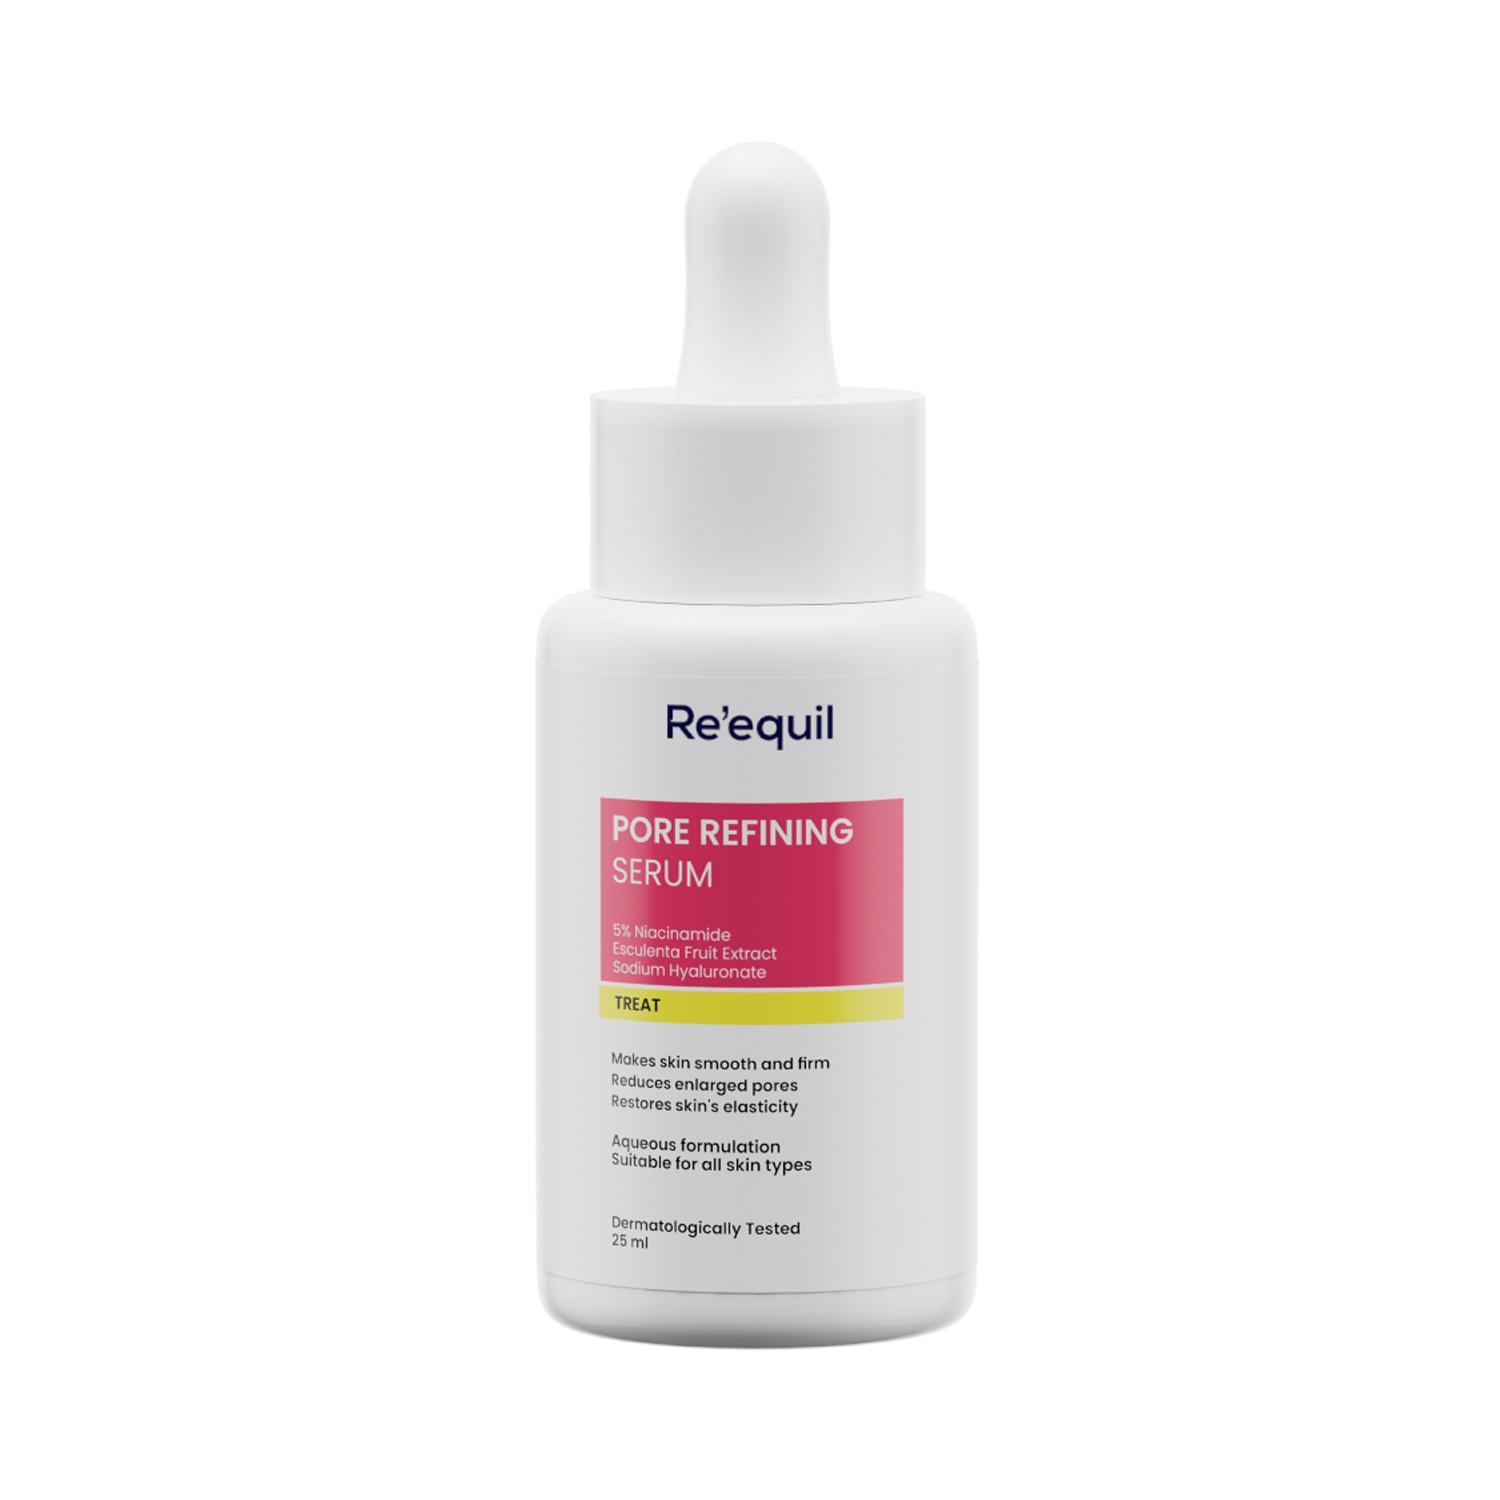 Re'equil | Re'equil Pore Refining Serum (25ml)